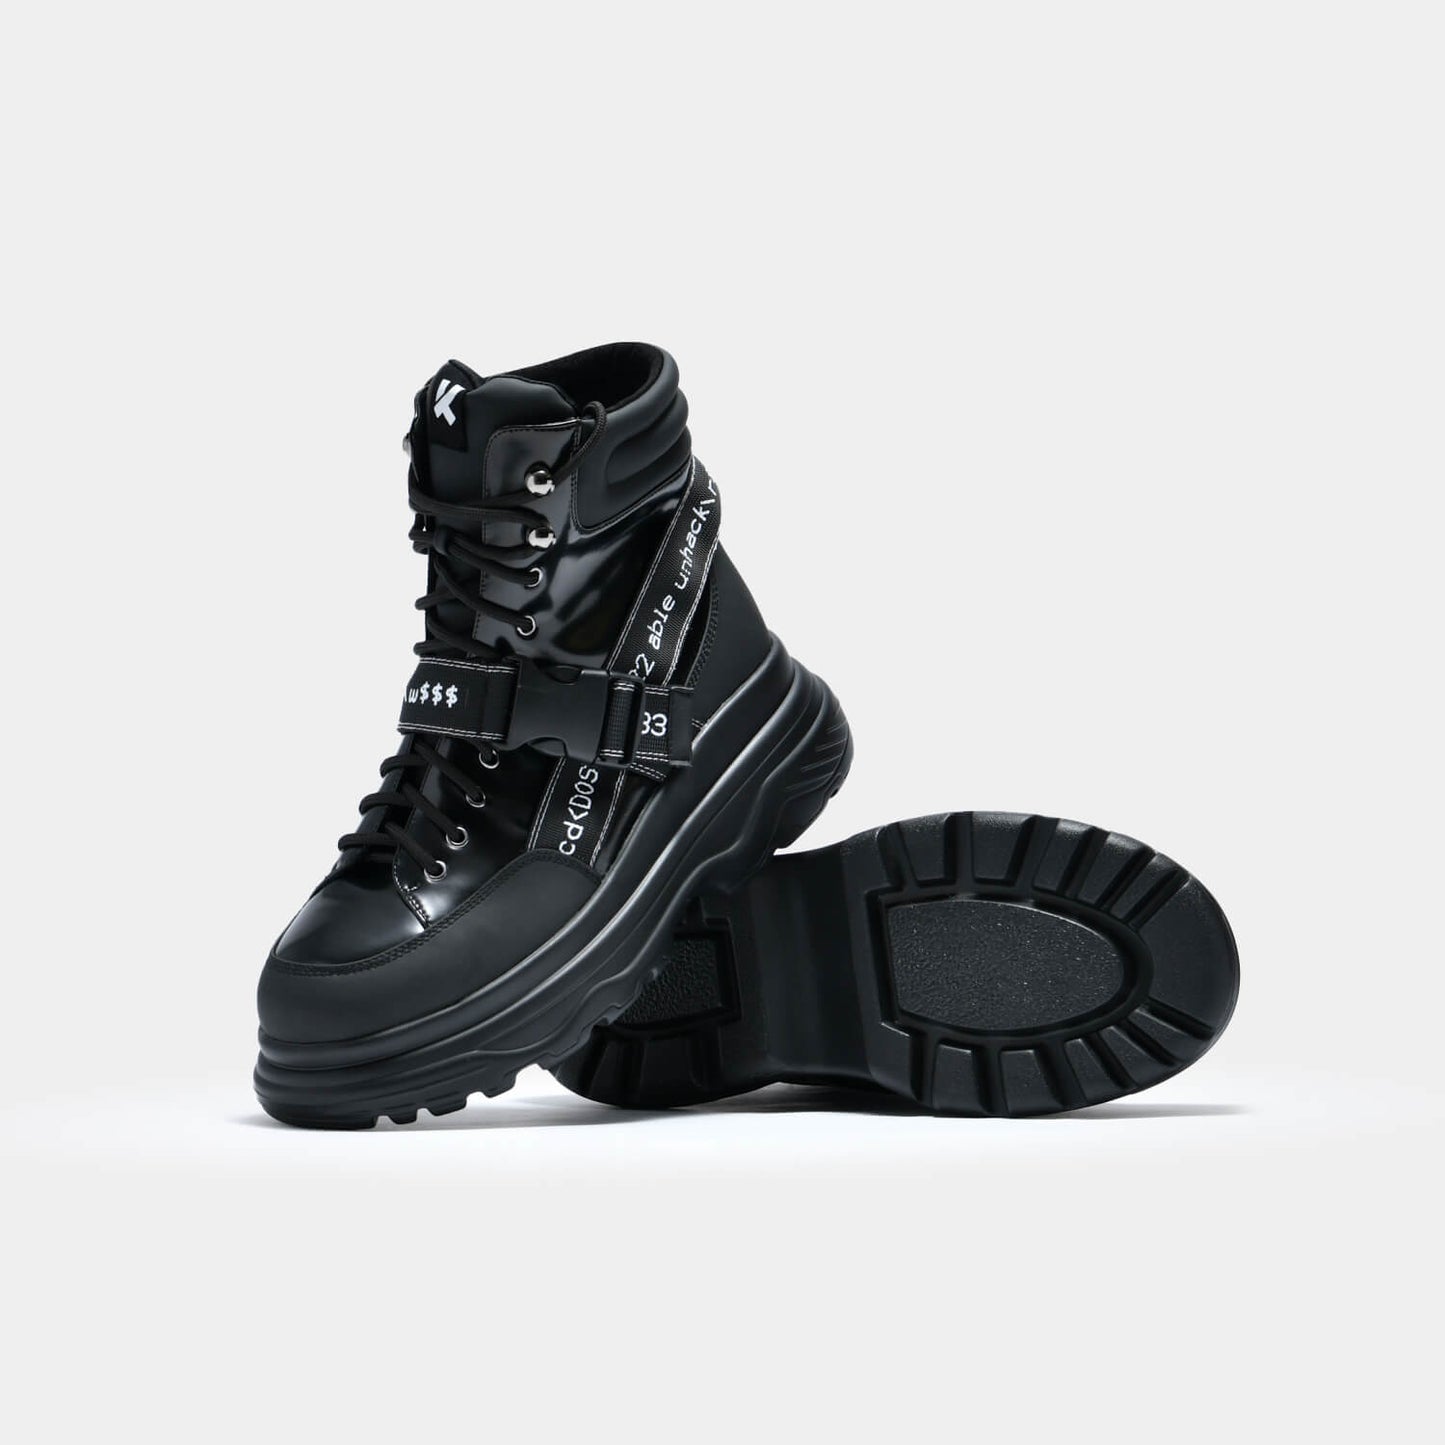 Cypher Men's Black Trail Boots - Ankle Boots - KOI Footwear - Black - Side and Sole View